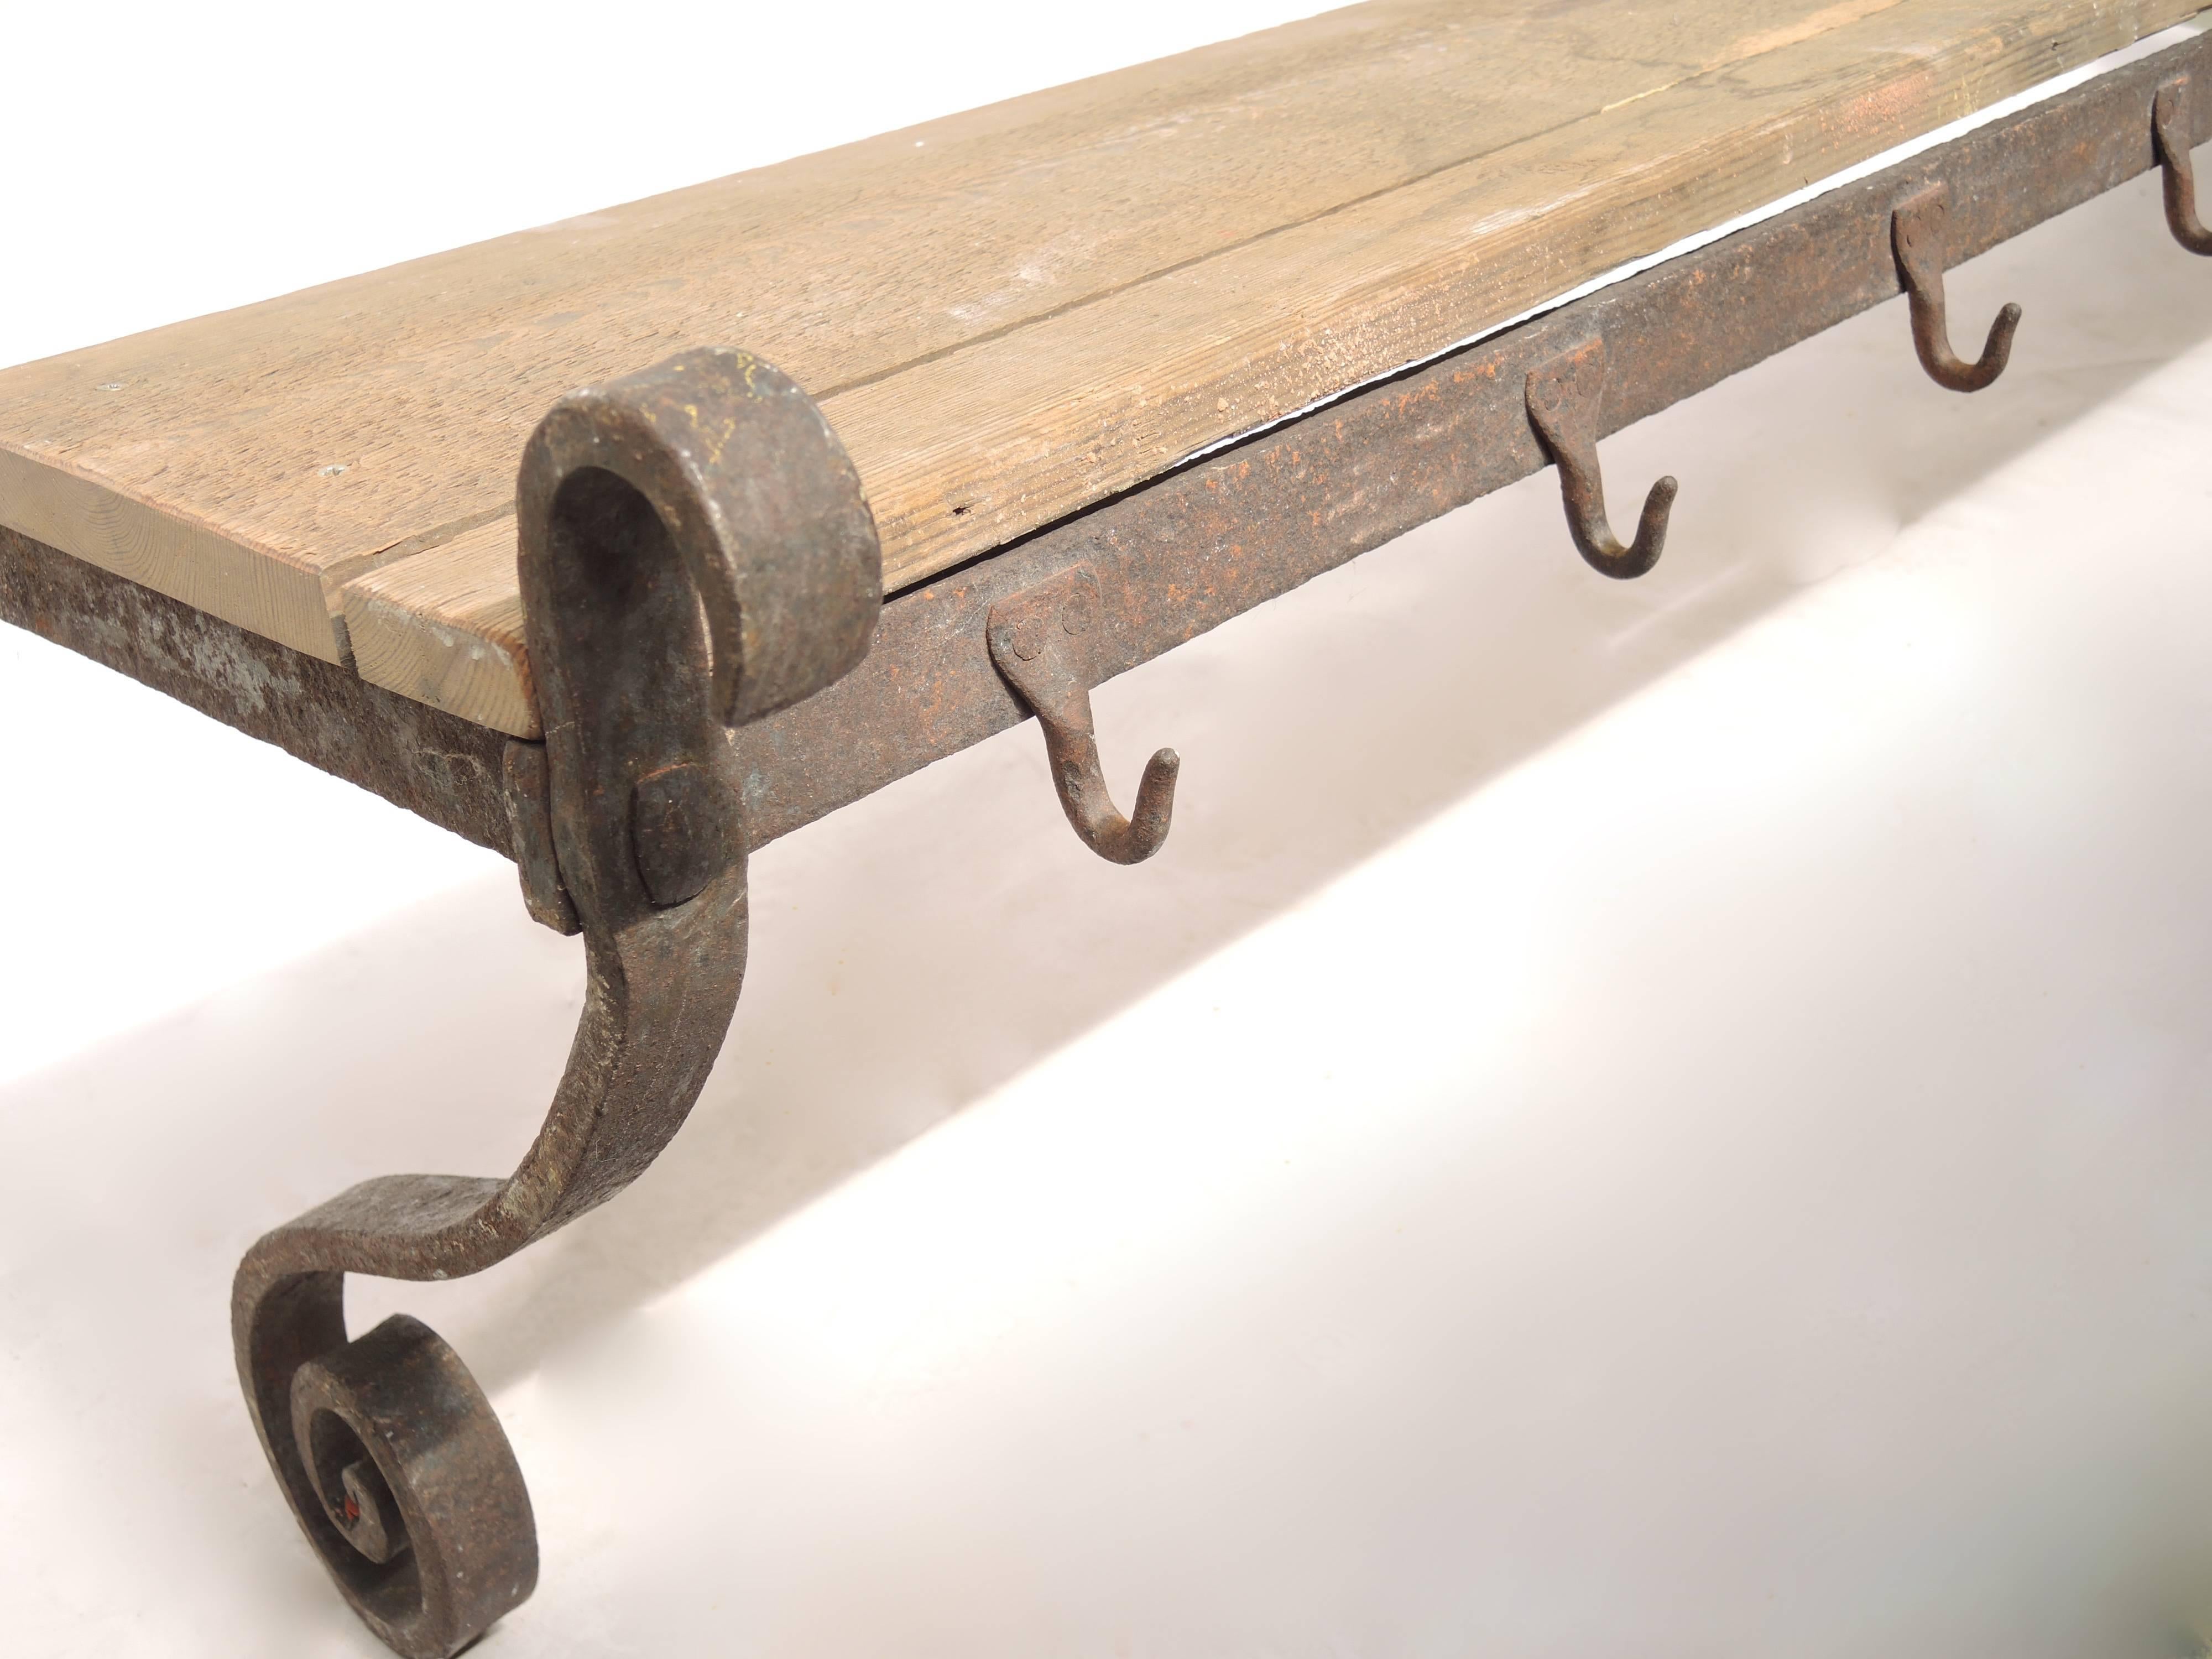 Hand wrought iron butchers/pot rack from the mid 18th Century. The perfect piece to place plates, pots etc on the shelf, and hang pots, herbs, meats ...
The rack was originally anchored into a brick wall from long pins running from the side;for more